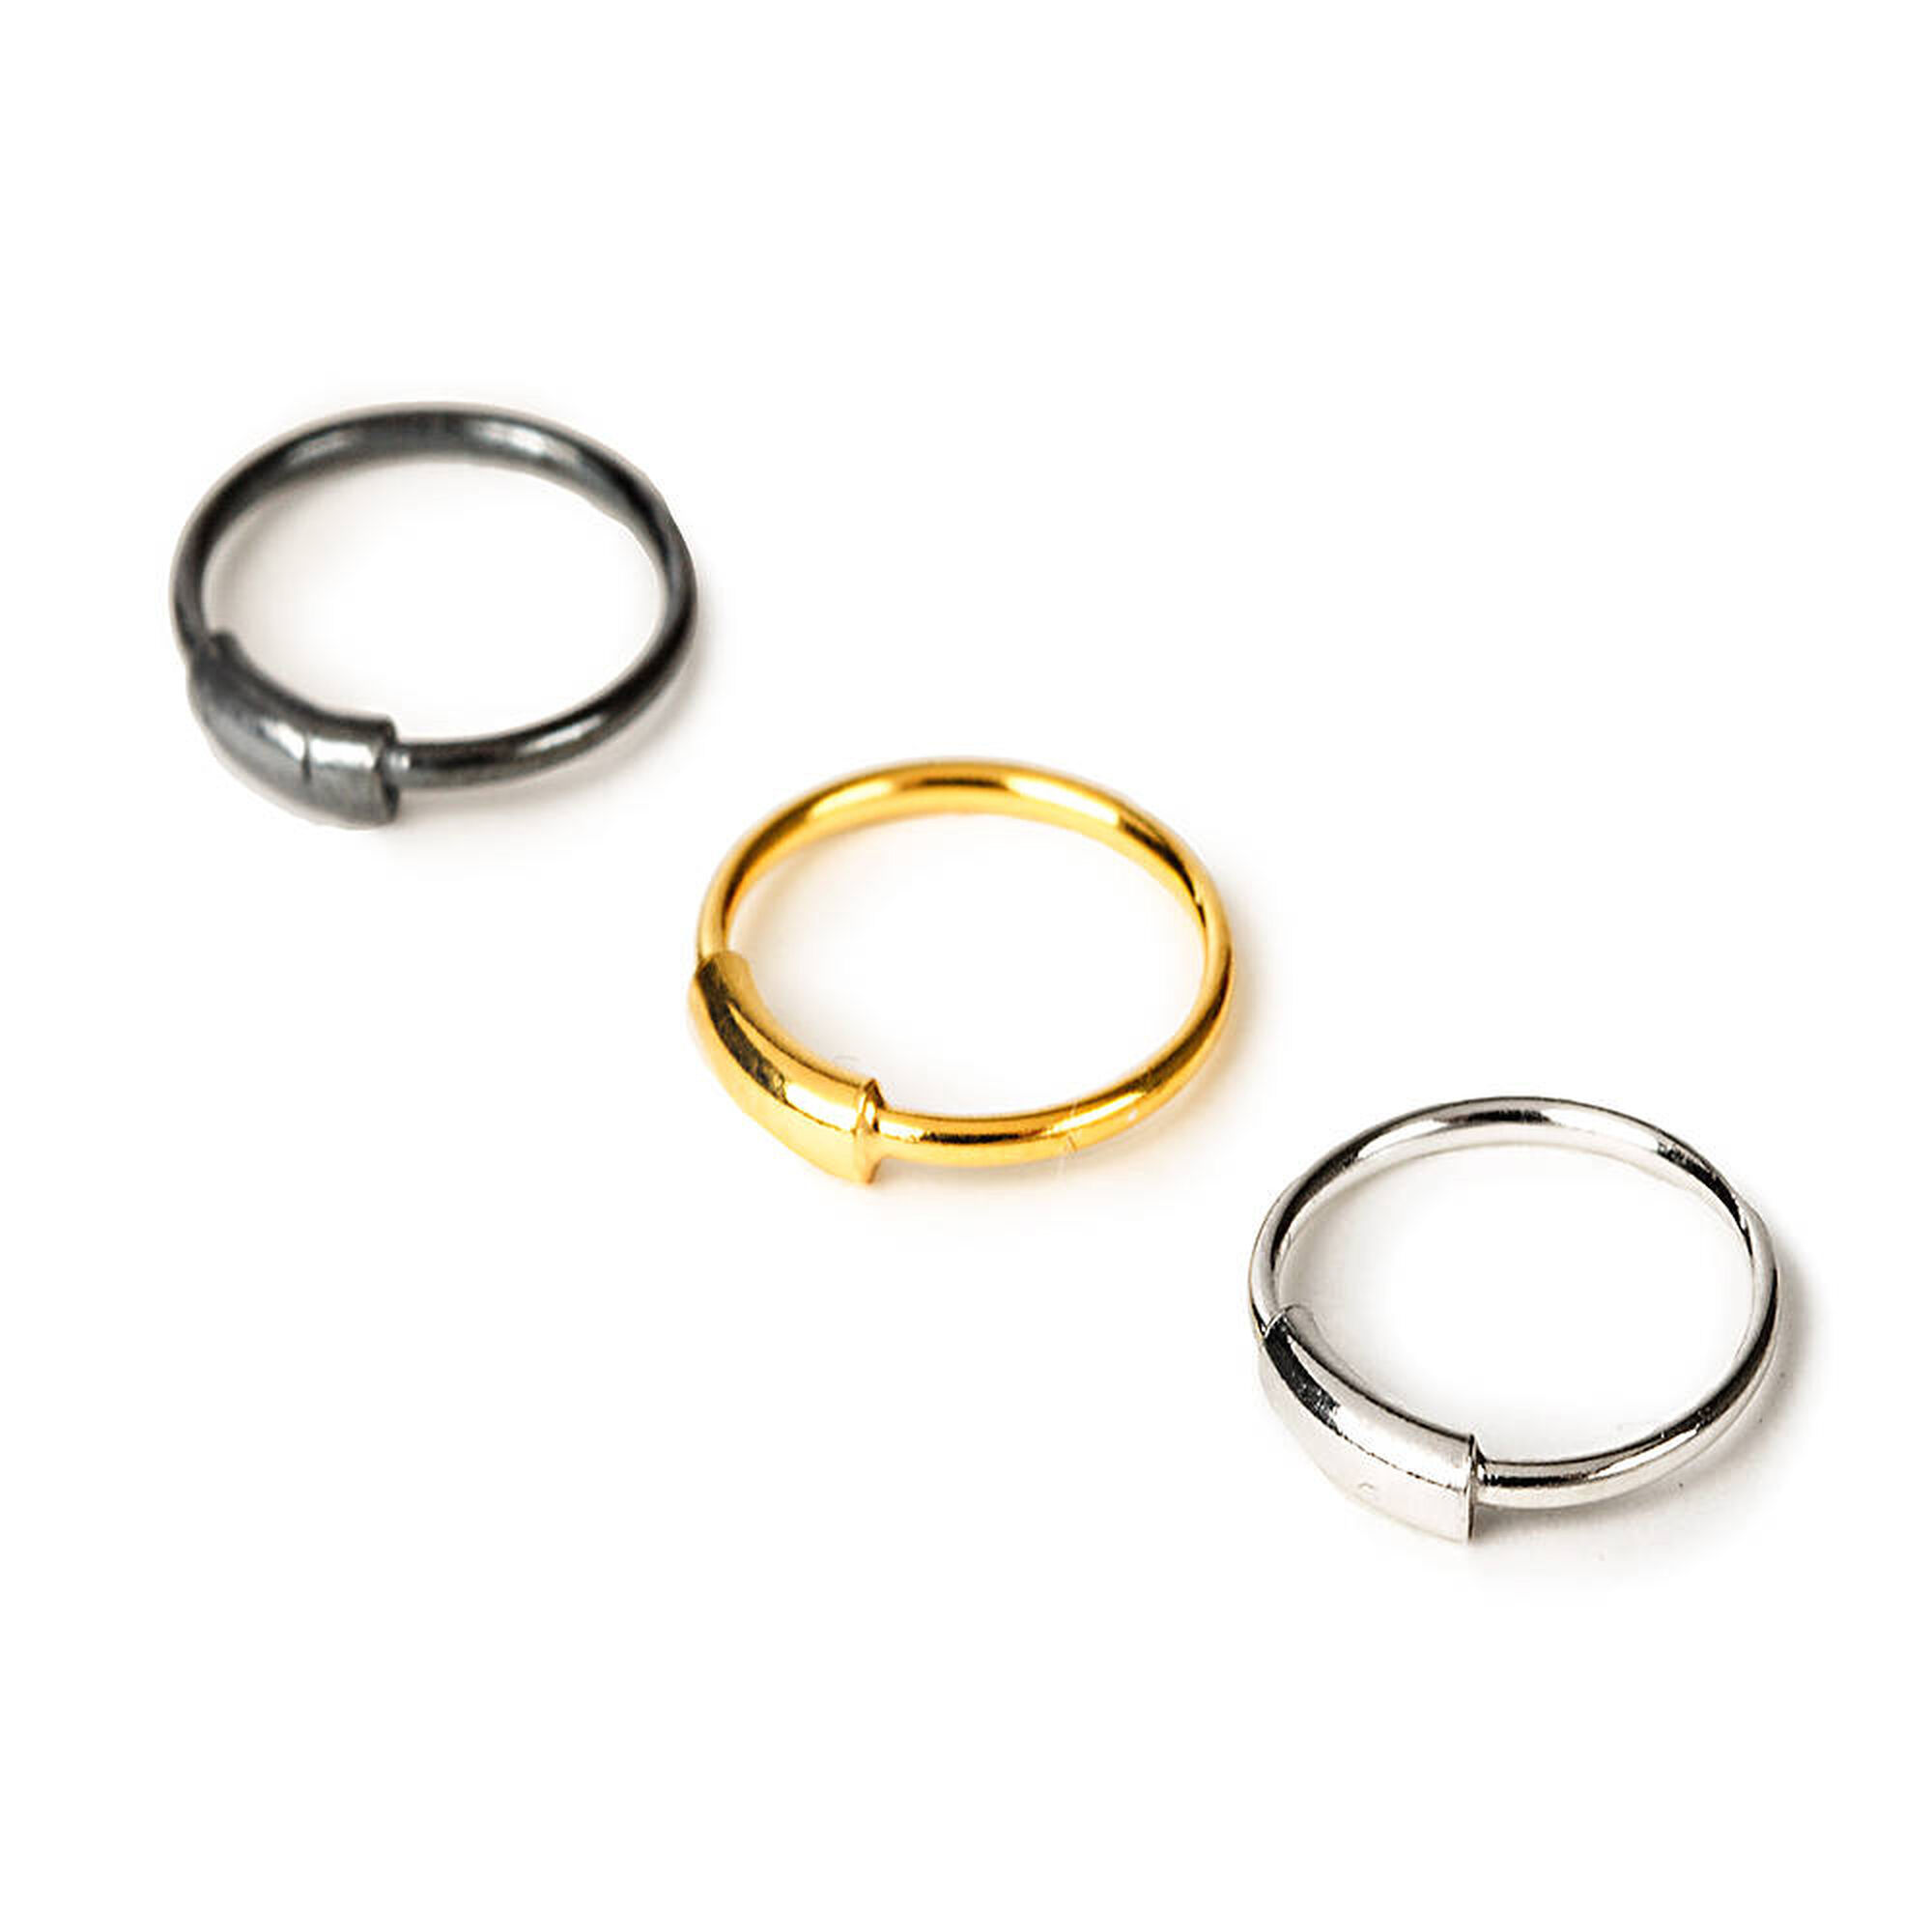 View Claires Mixed Metal 22G Bar Hoop Nose Rings 3 Pack Silver information